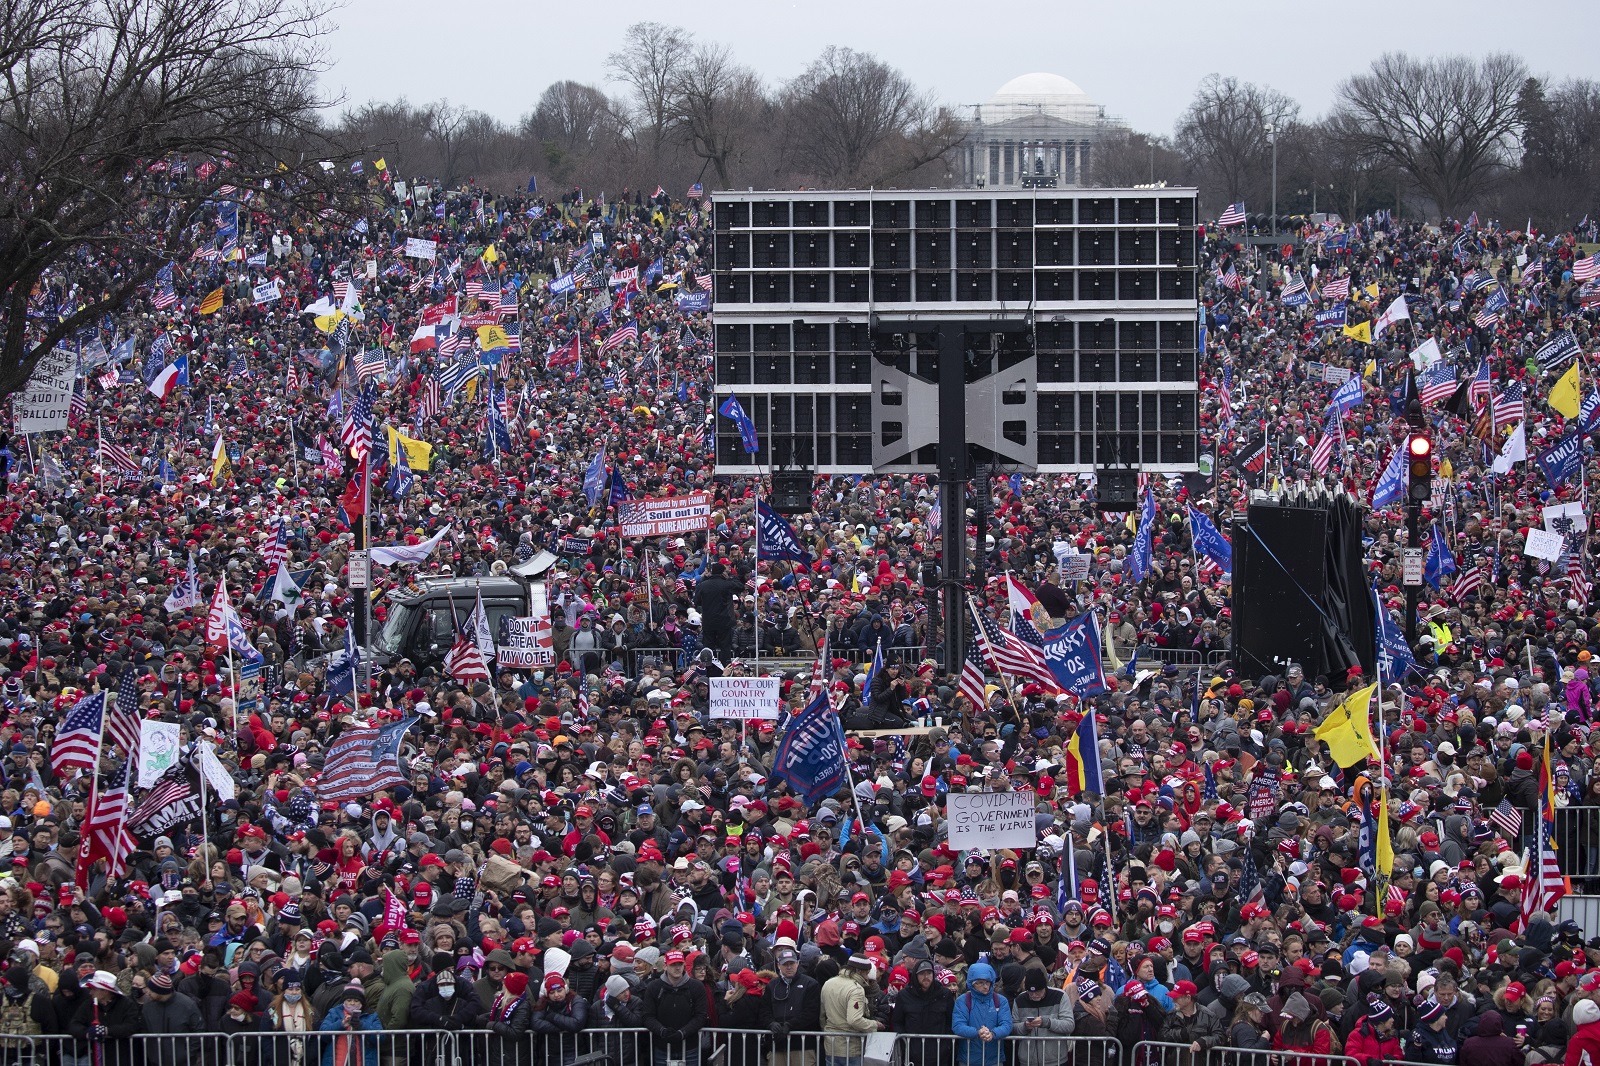 epa08922384 Thousands of supporters of US President Donald J. Trump gather on the National Mall outside a rally on the Ellipse near the White House in Washington, DC, USA, 06 January 2021. Right-wing conservative groups are protesting against Congress counting the electoral college votes. Dozens of state and federal judges have shot down challenges to the 2020 presidential election, finding the accusations of fraud to be without merit.  EPA/MICHAEL REYNOLDS